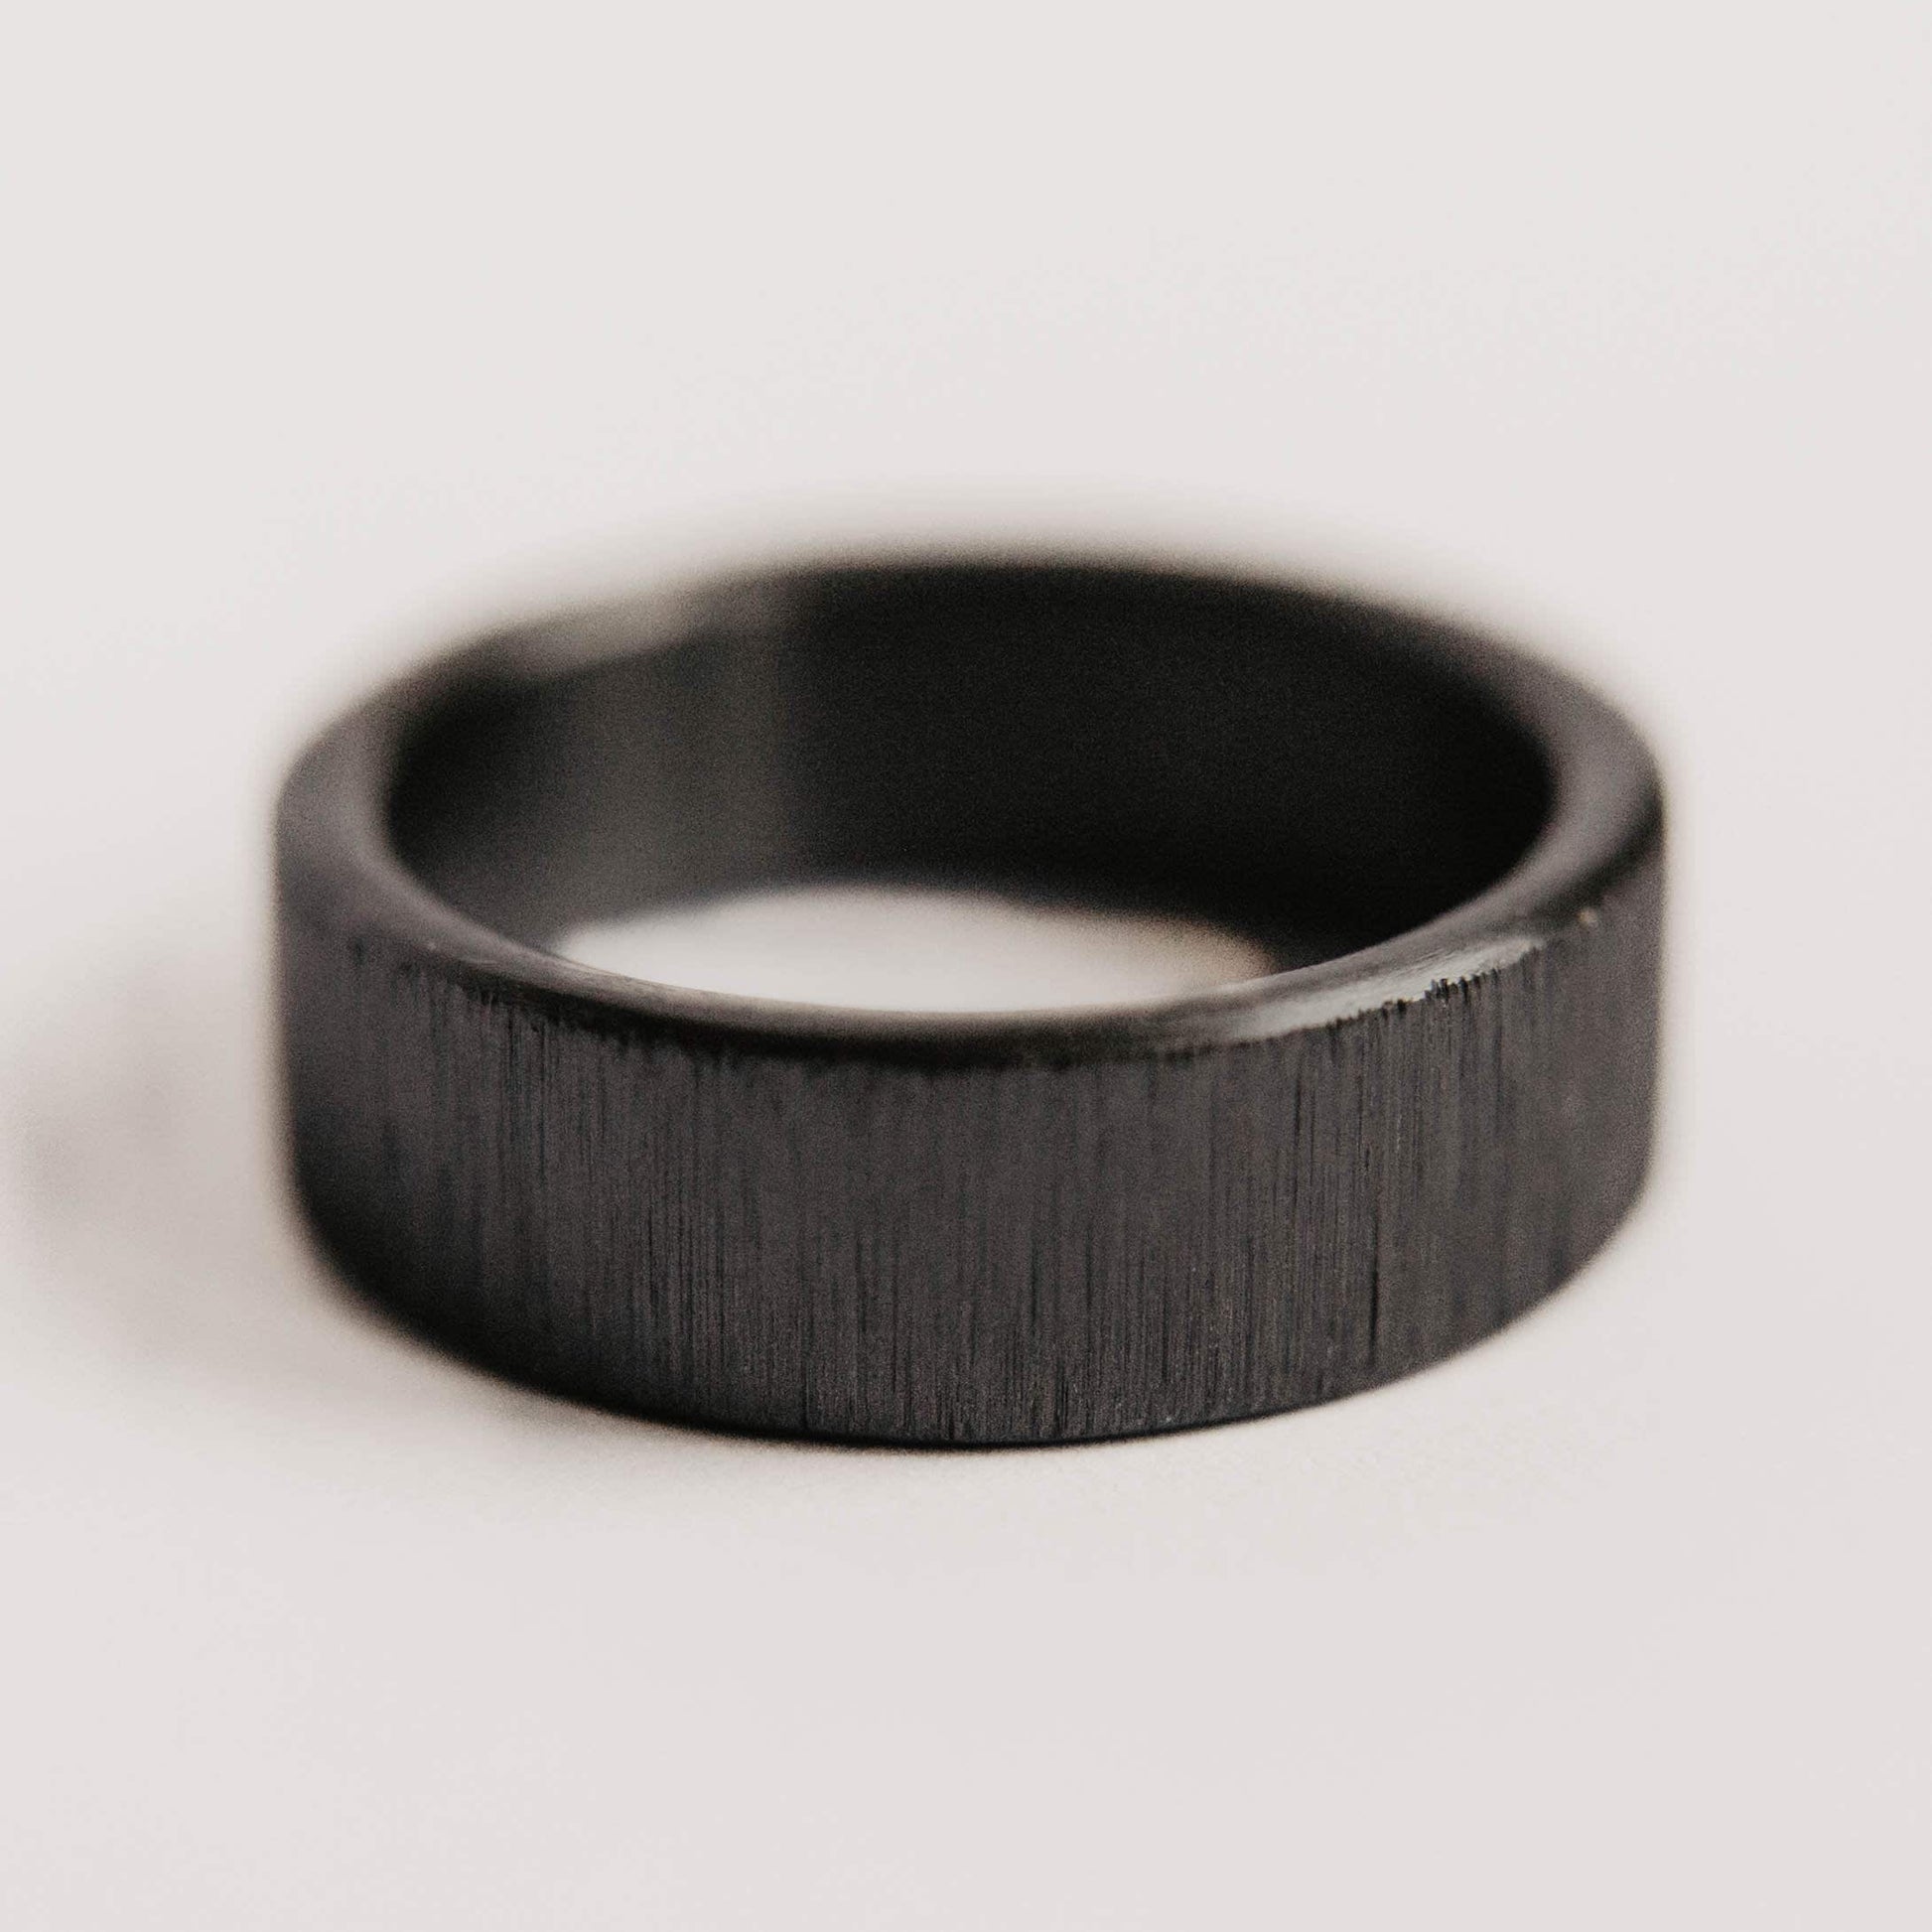 Vertical Grit Zirconium Mens Wedding band. This photo shows a vertical grit zirconium band. (Horizontal with white background)